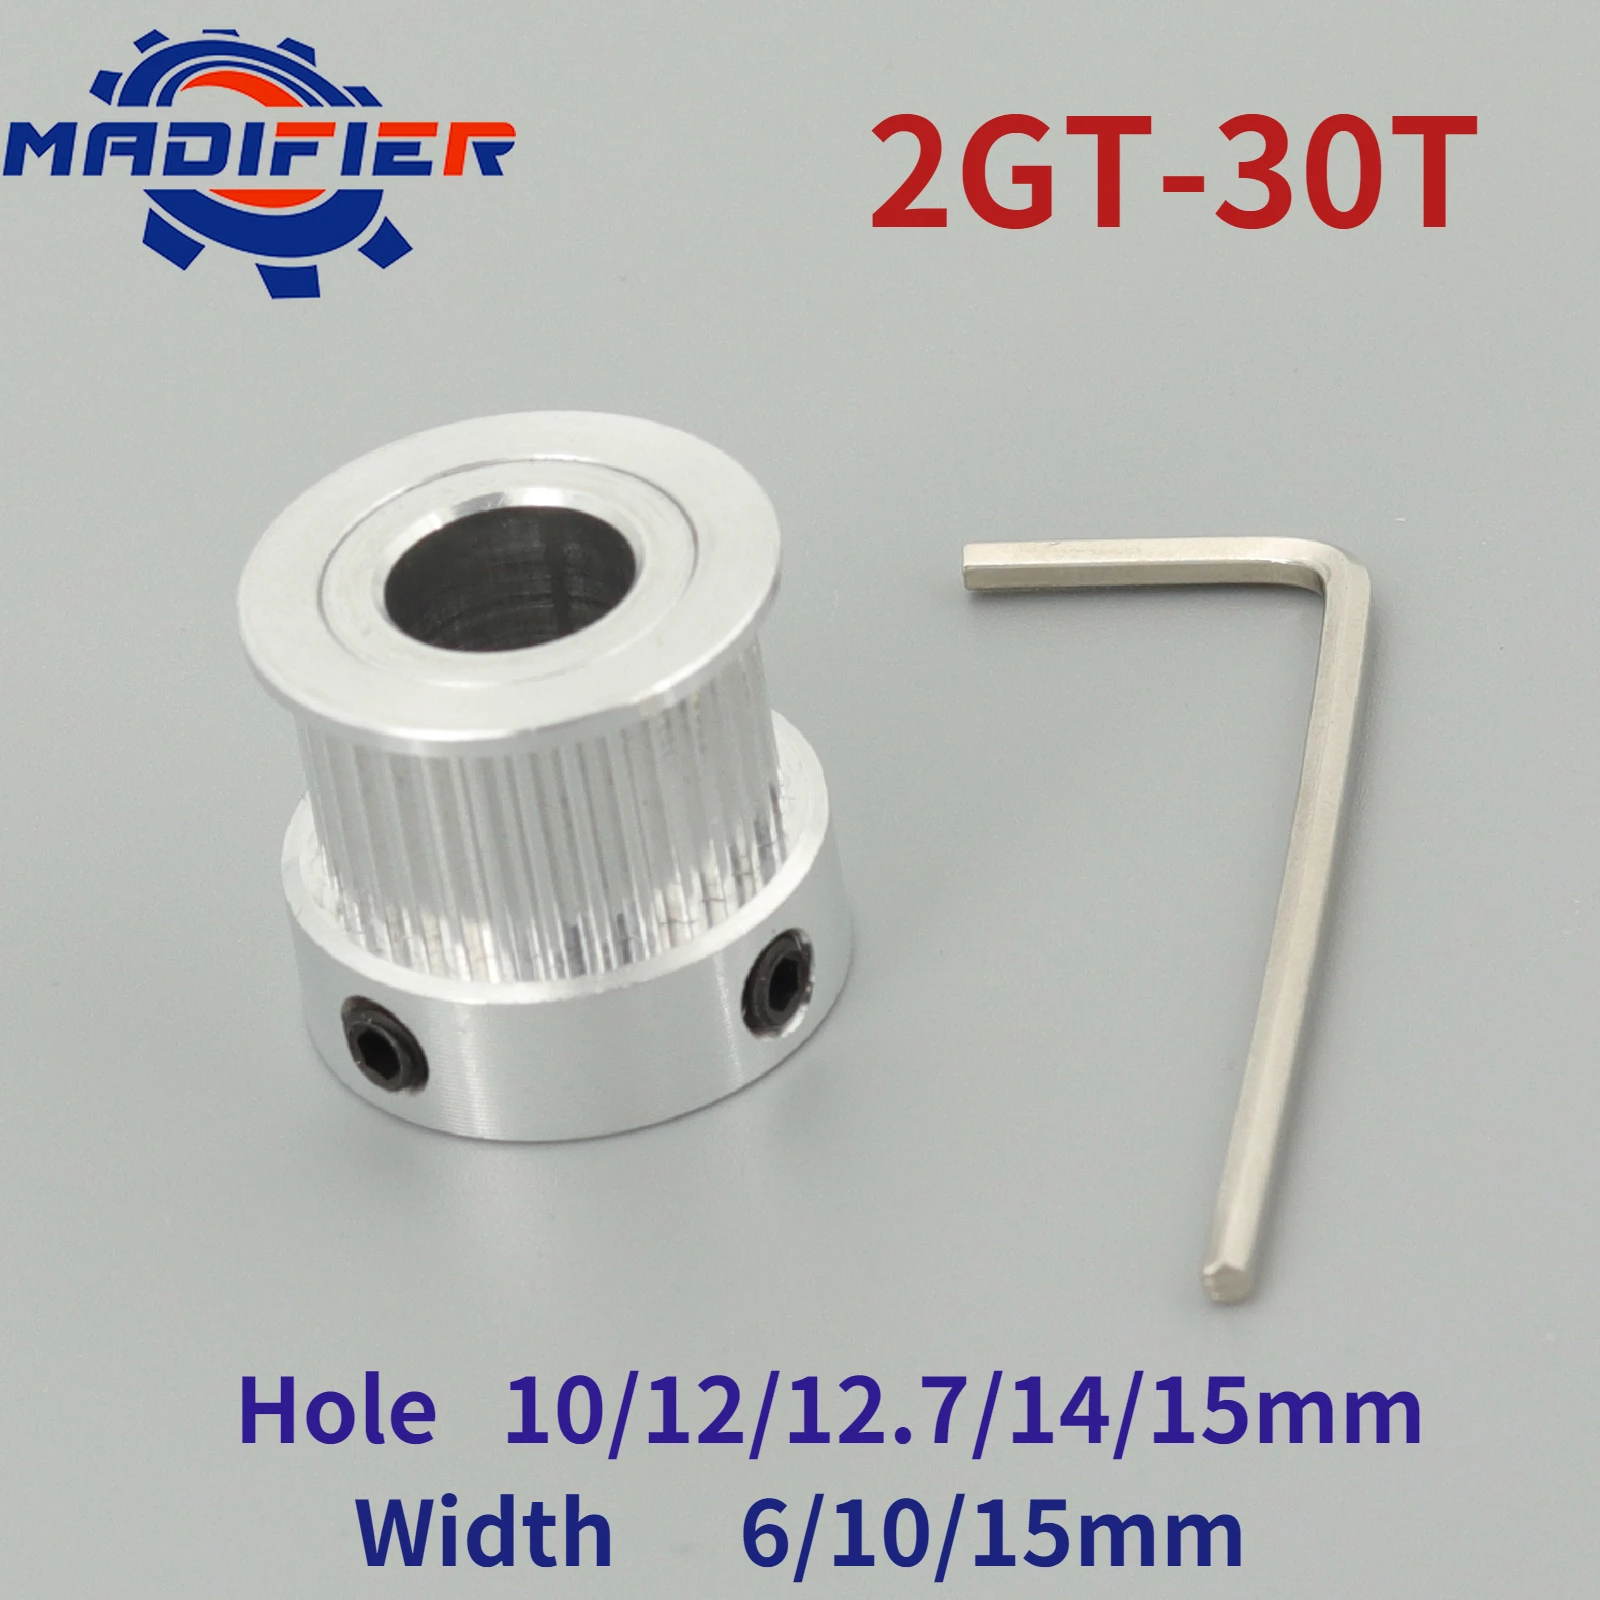 

GKTOOLS 3D Printer Parts GT2 Timing Pulley 2GT 30 Teeth Bore 10/12/12.7/14/15mm Synchronous Wheels for Width 6/10/15mm Belt